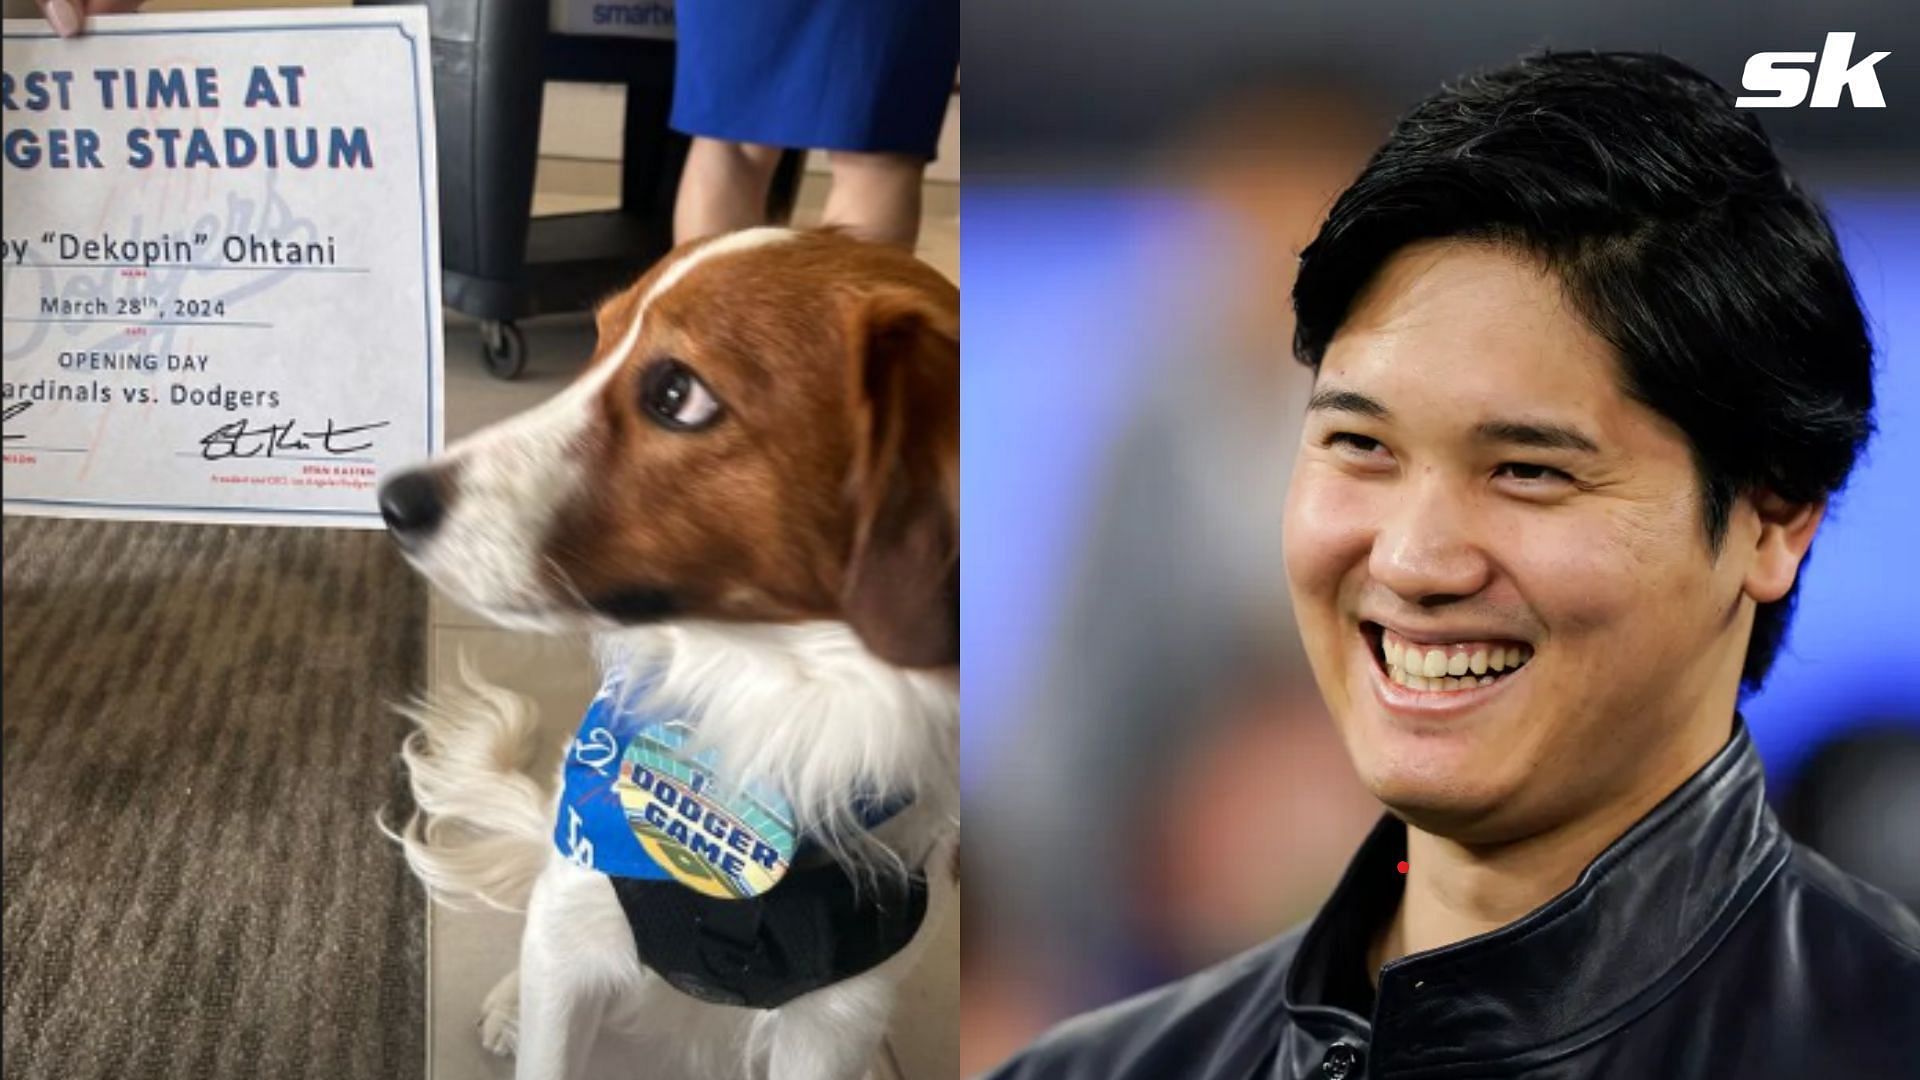 Shohei Ohtani brought his dog, Dekopin, to the Dodgers